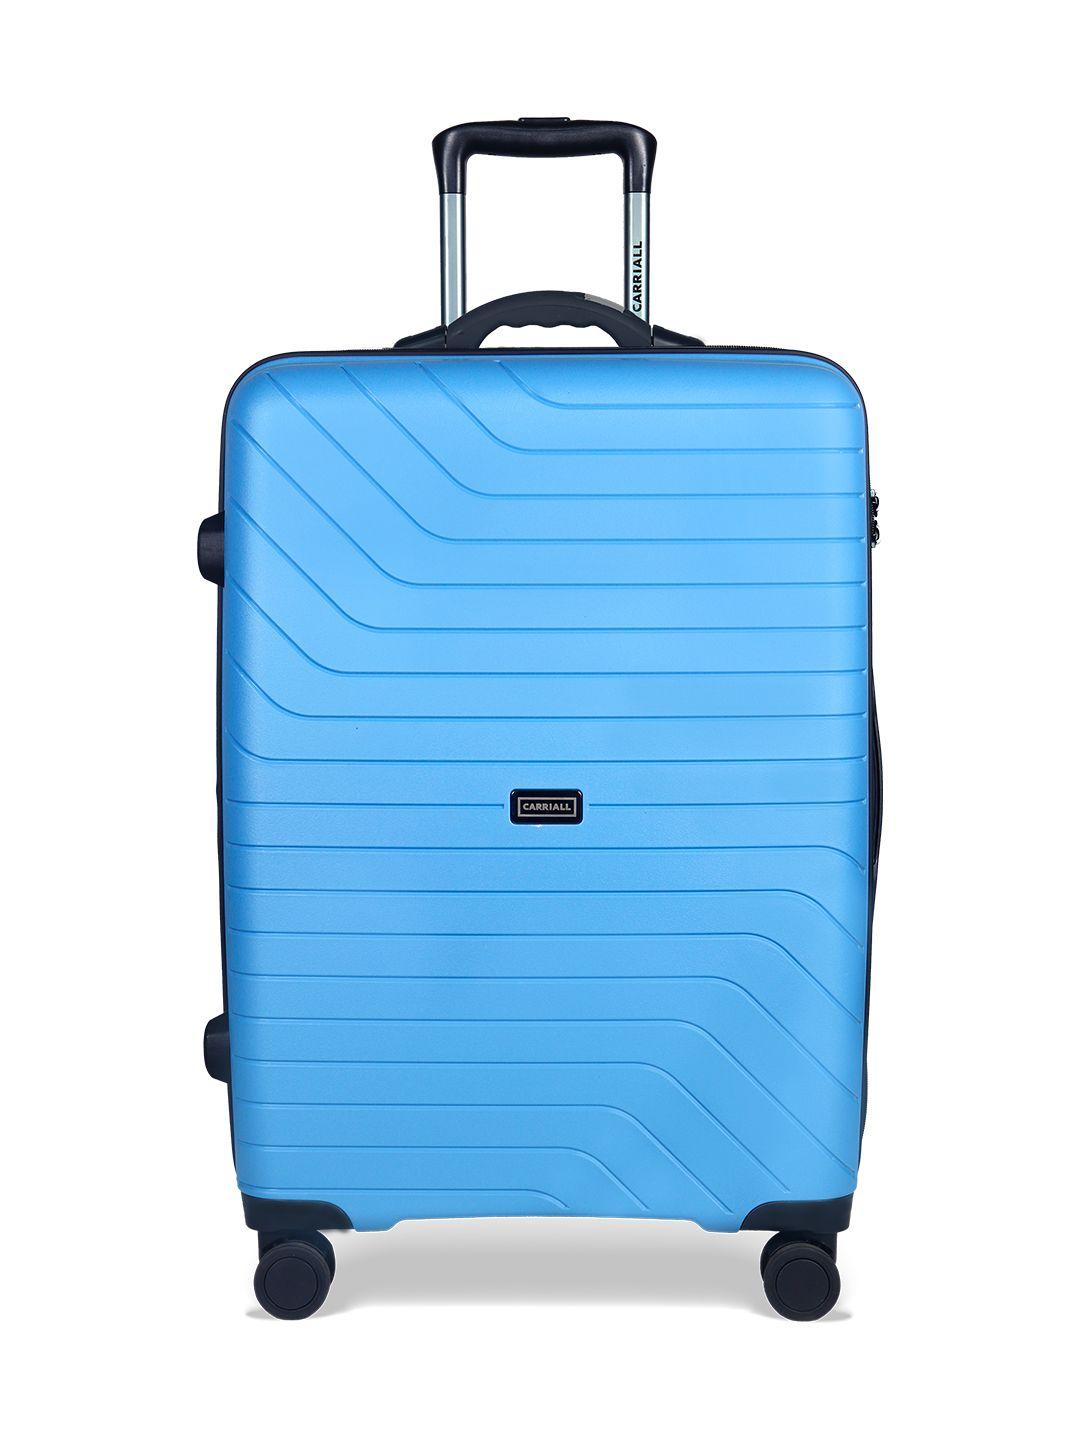 carriall textured hard-sided medium trolley suitcase